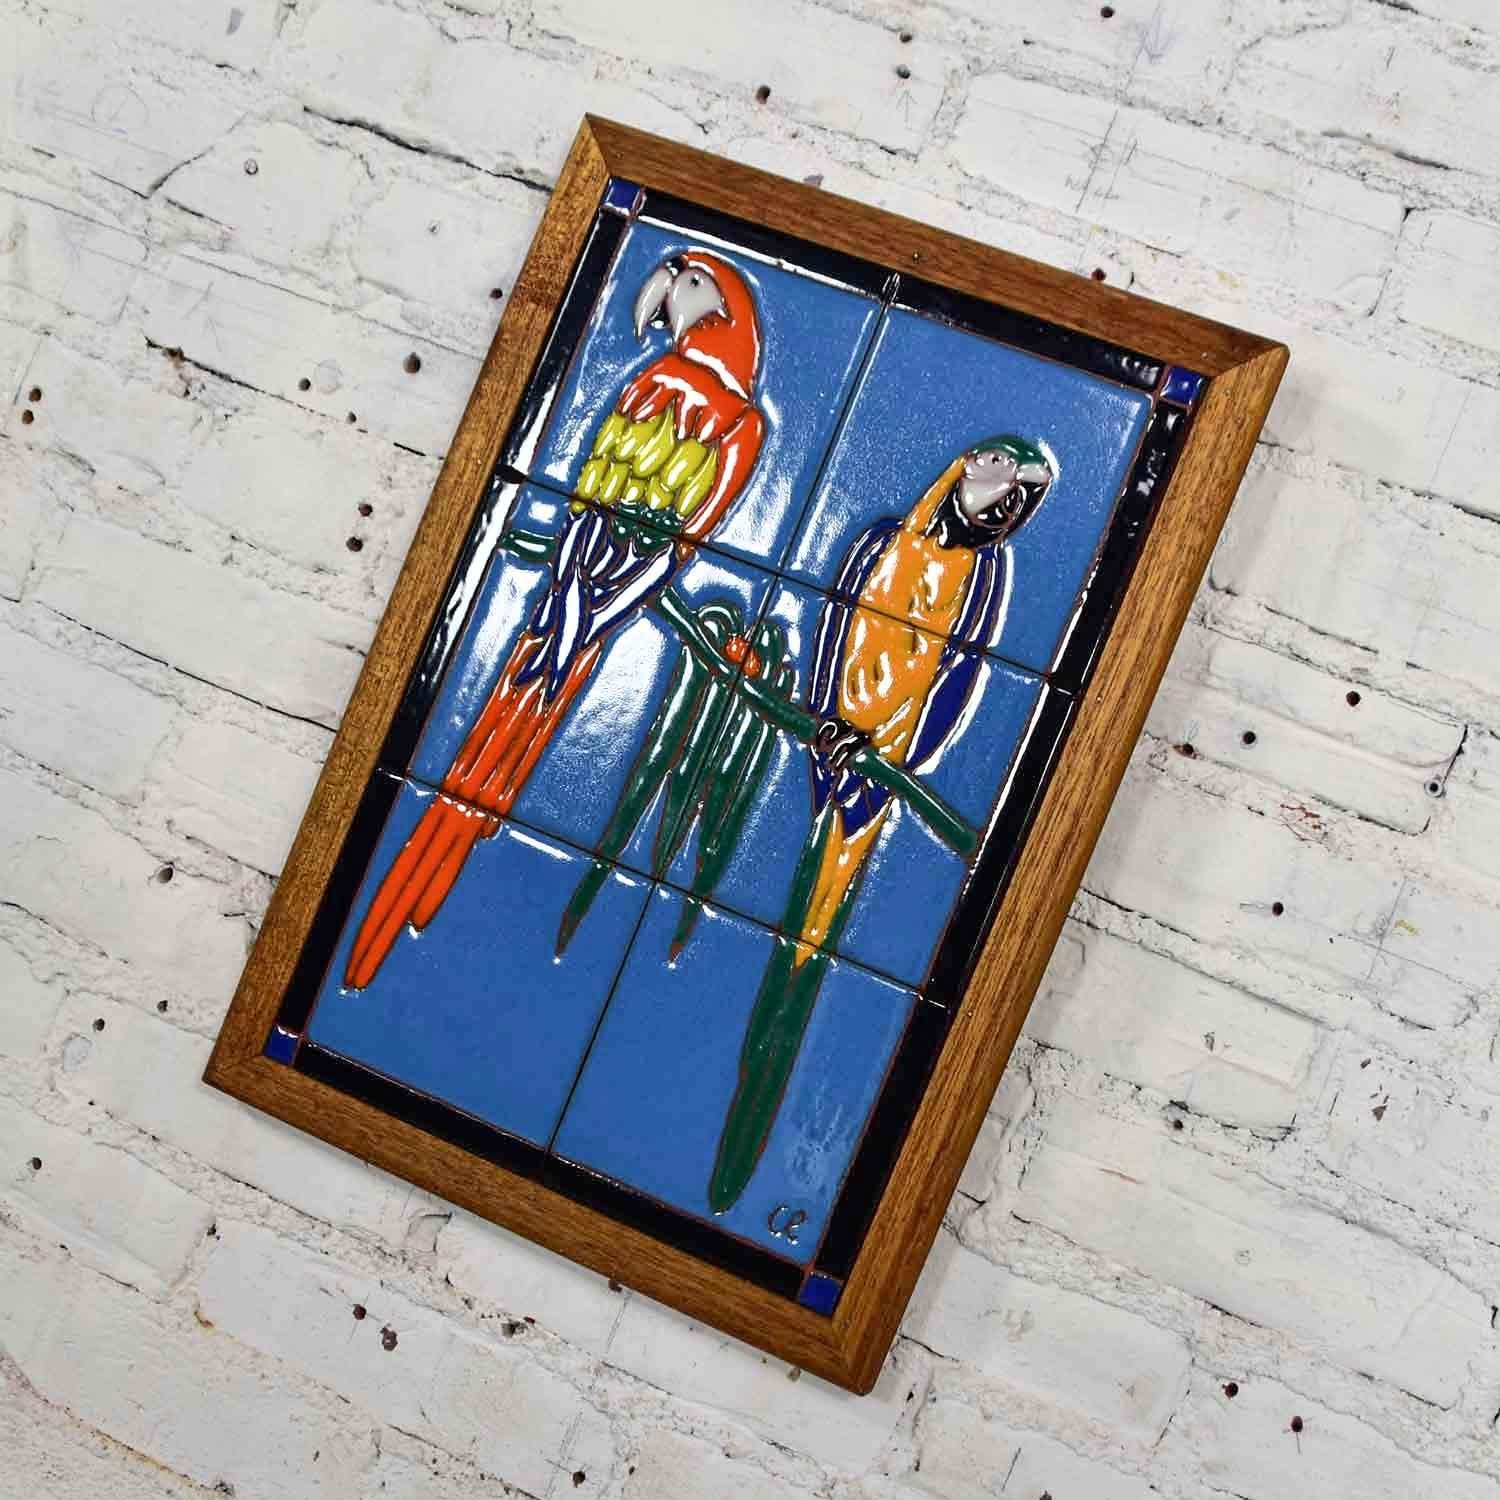 Parrot Ceramic Tile Framed Plaque by Christopher Reutinger Catalina Picture Tile In Good Condition For Sale In Topeka, KS